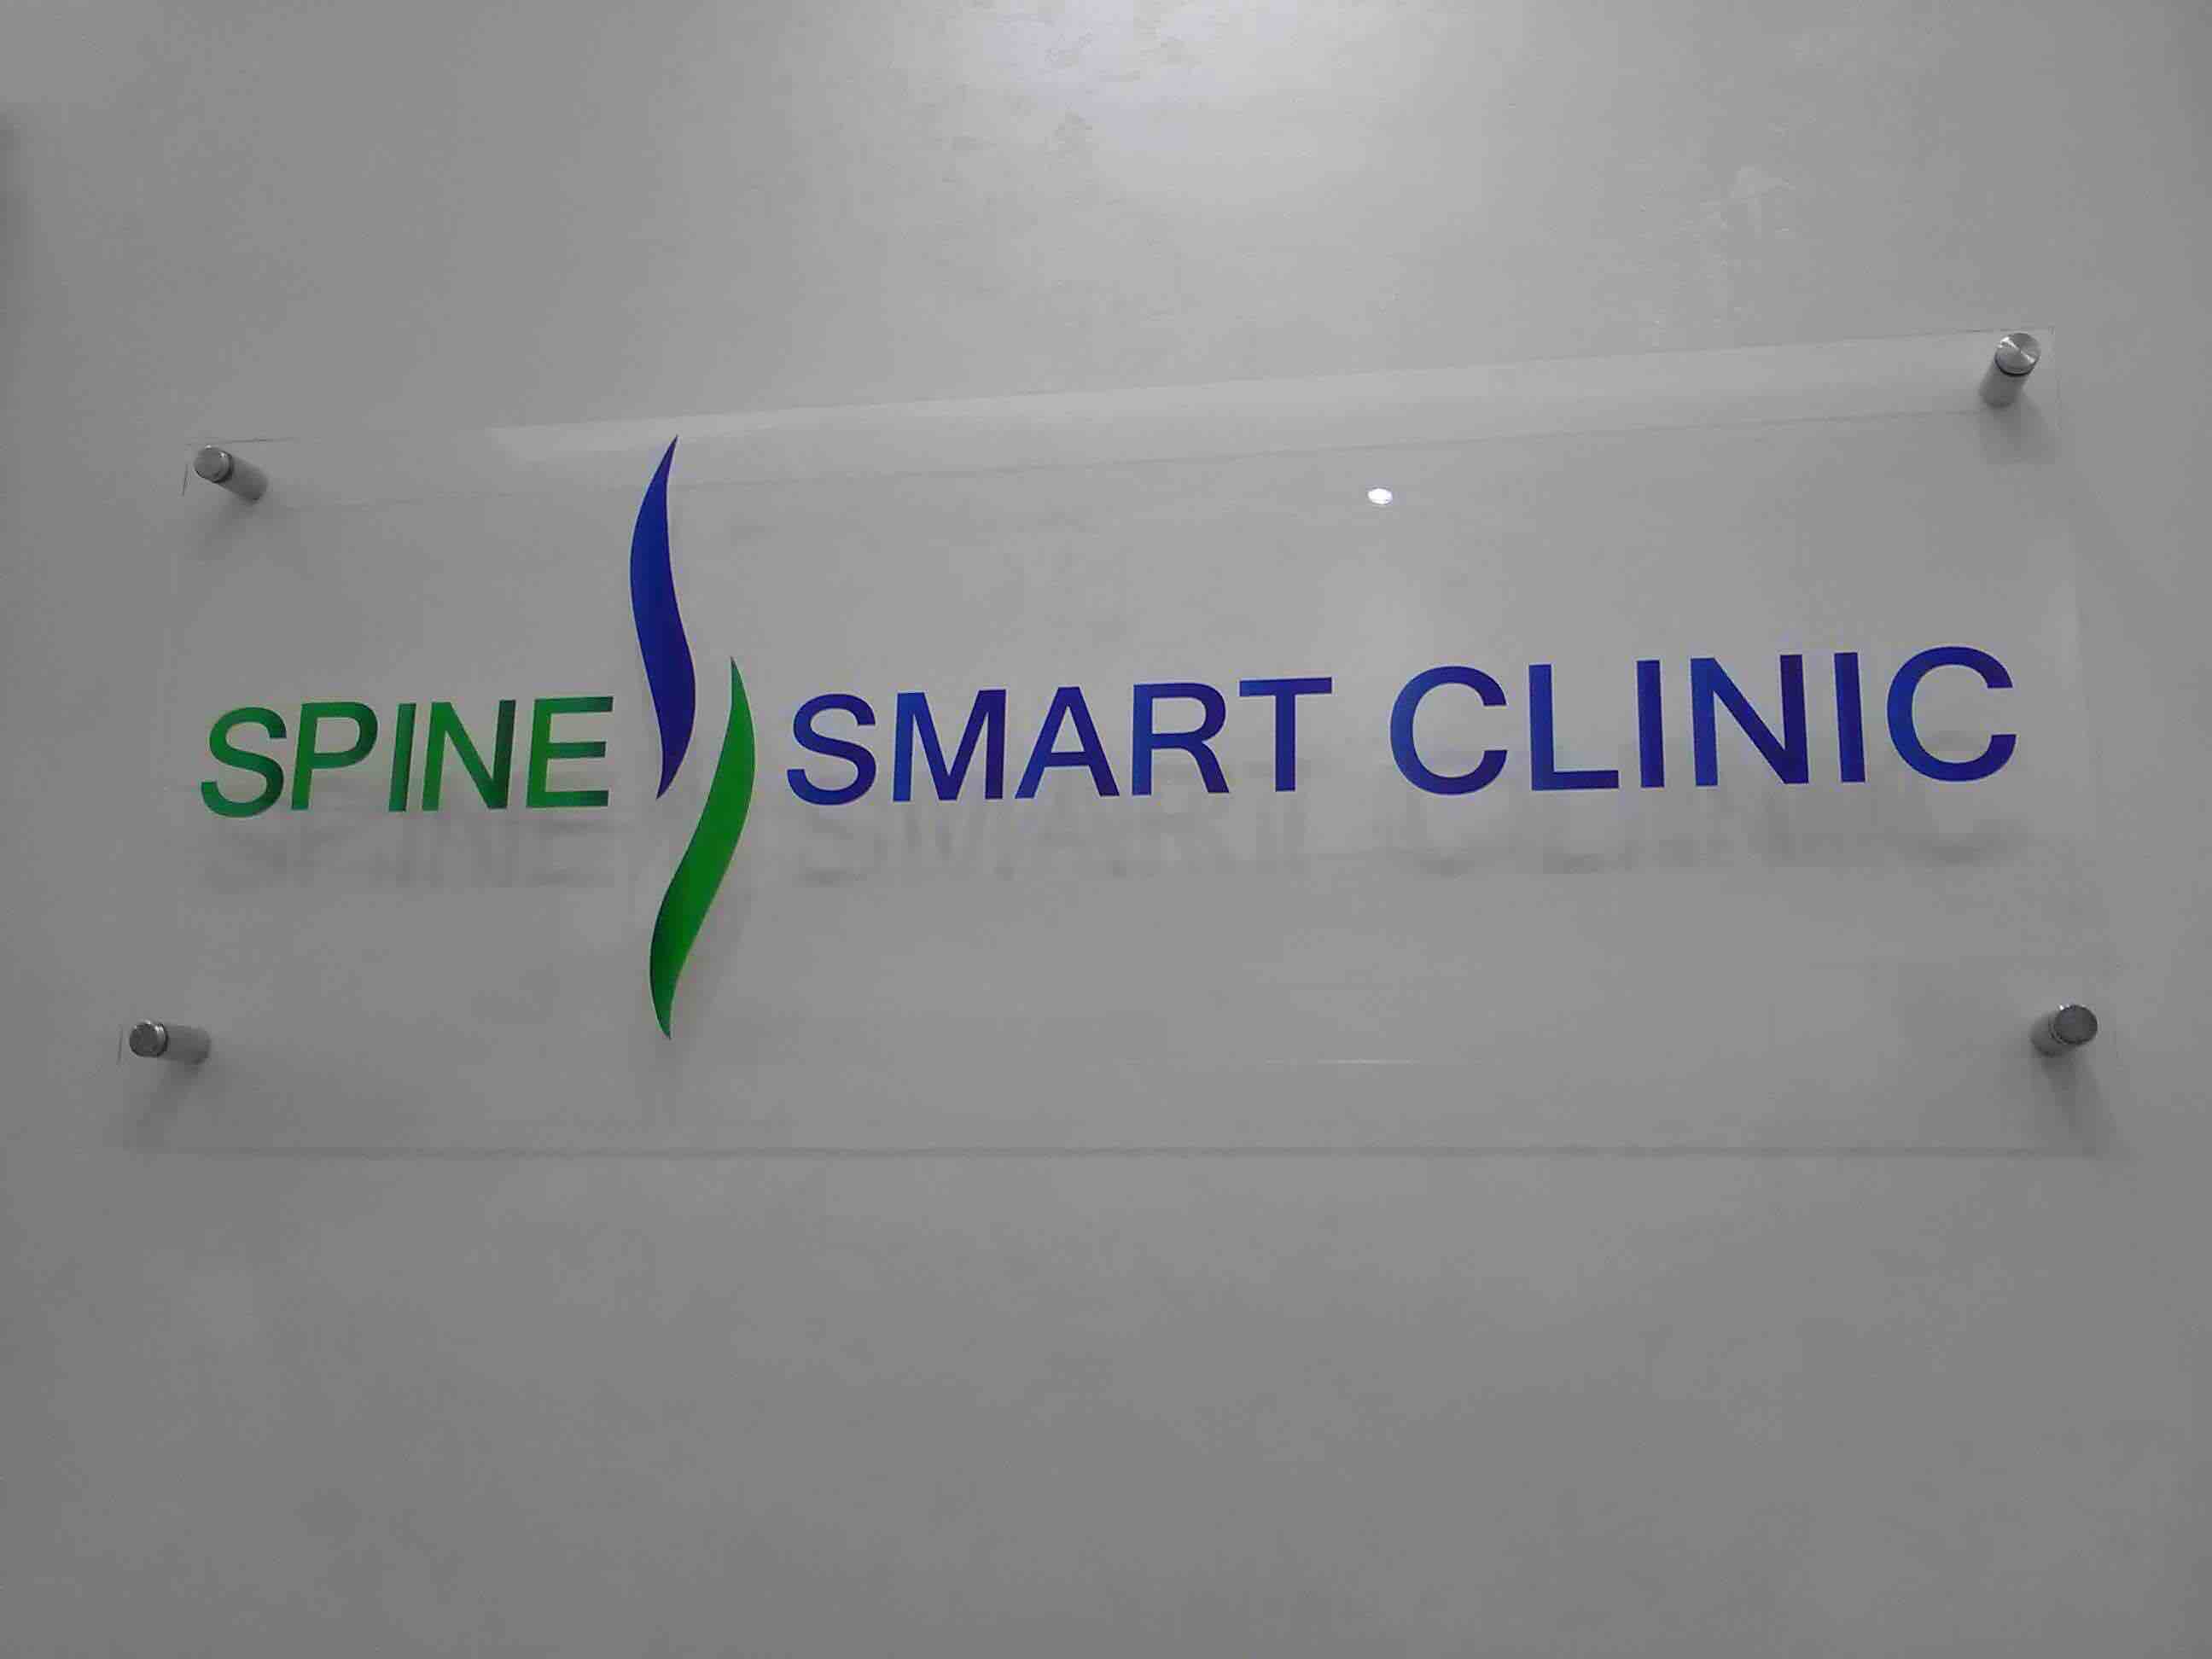 Spine smart clinic